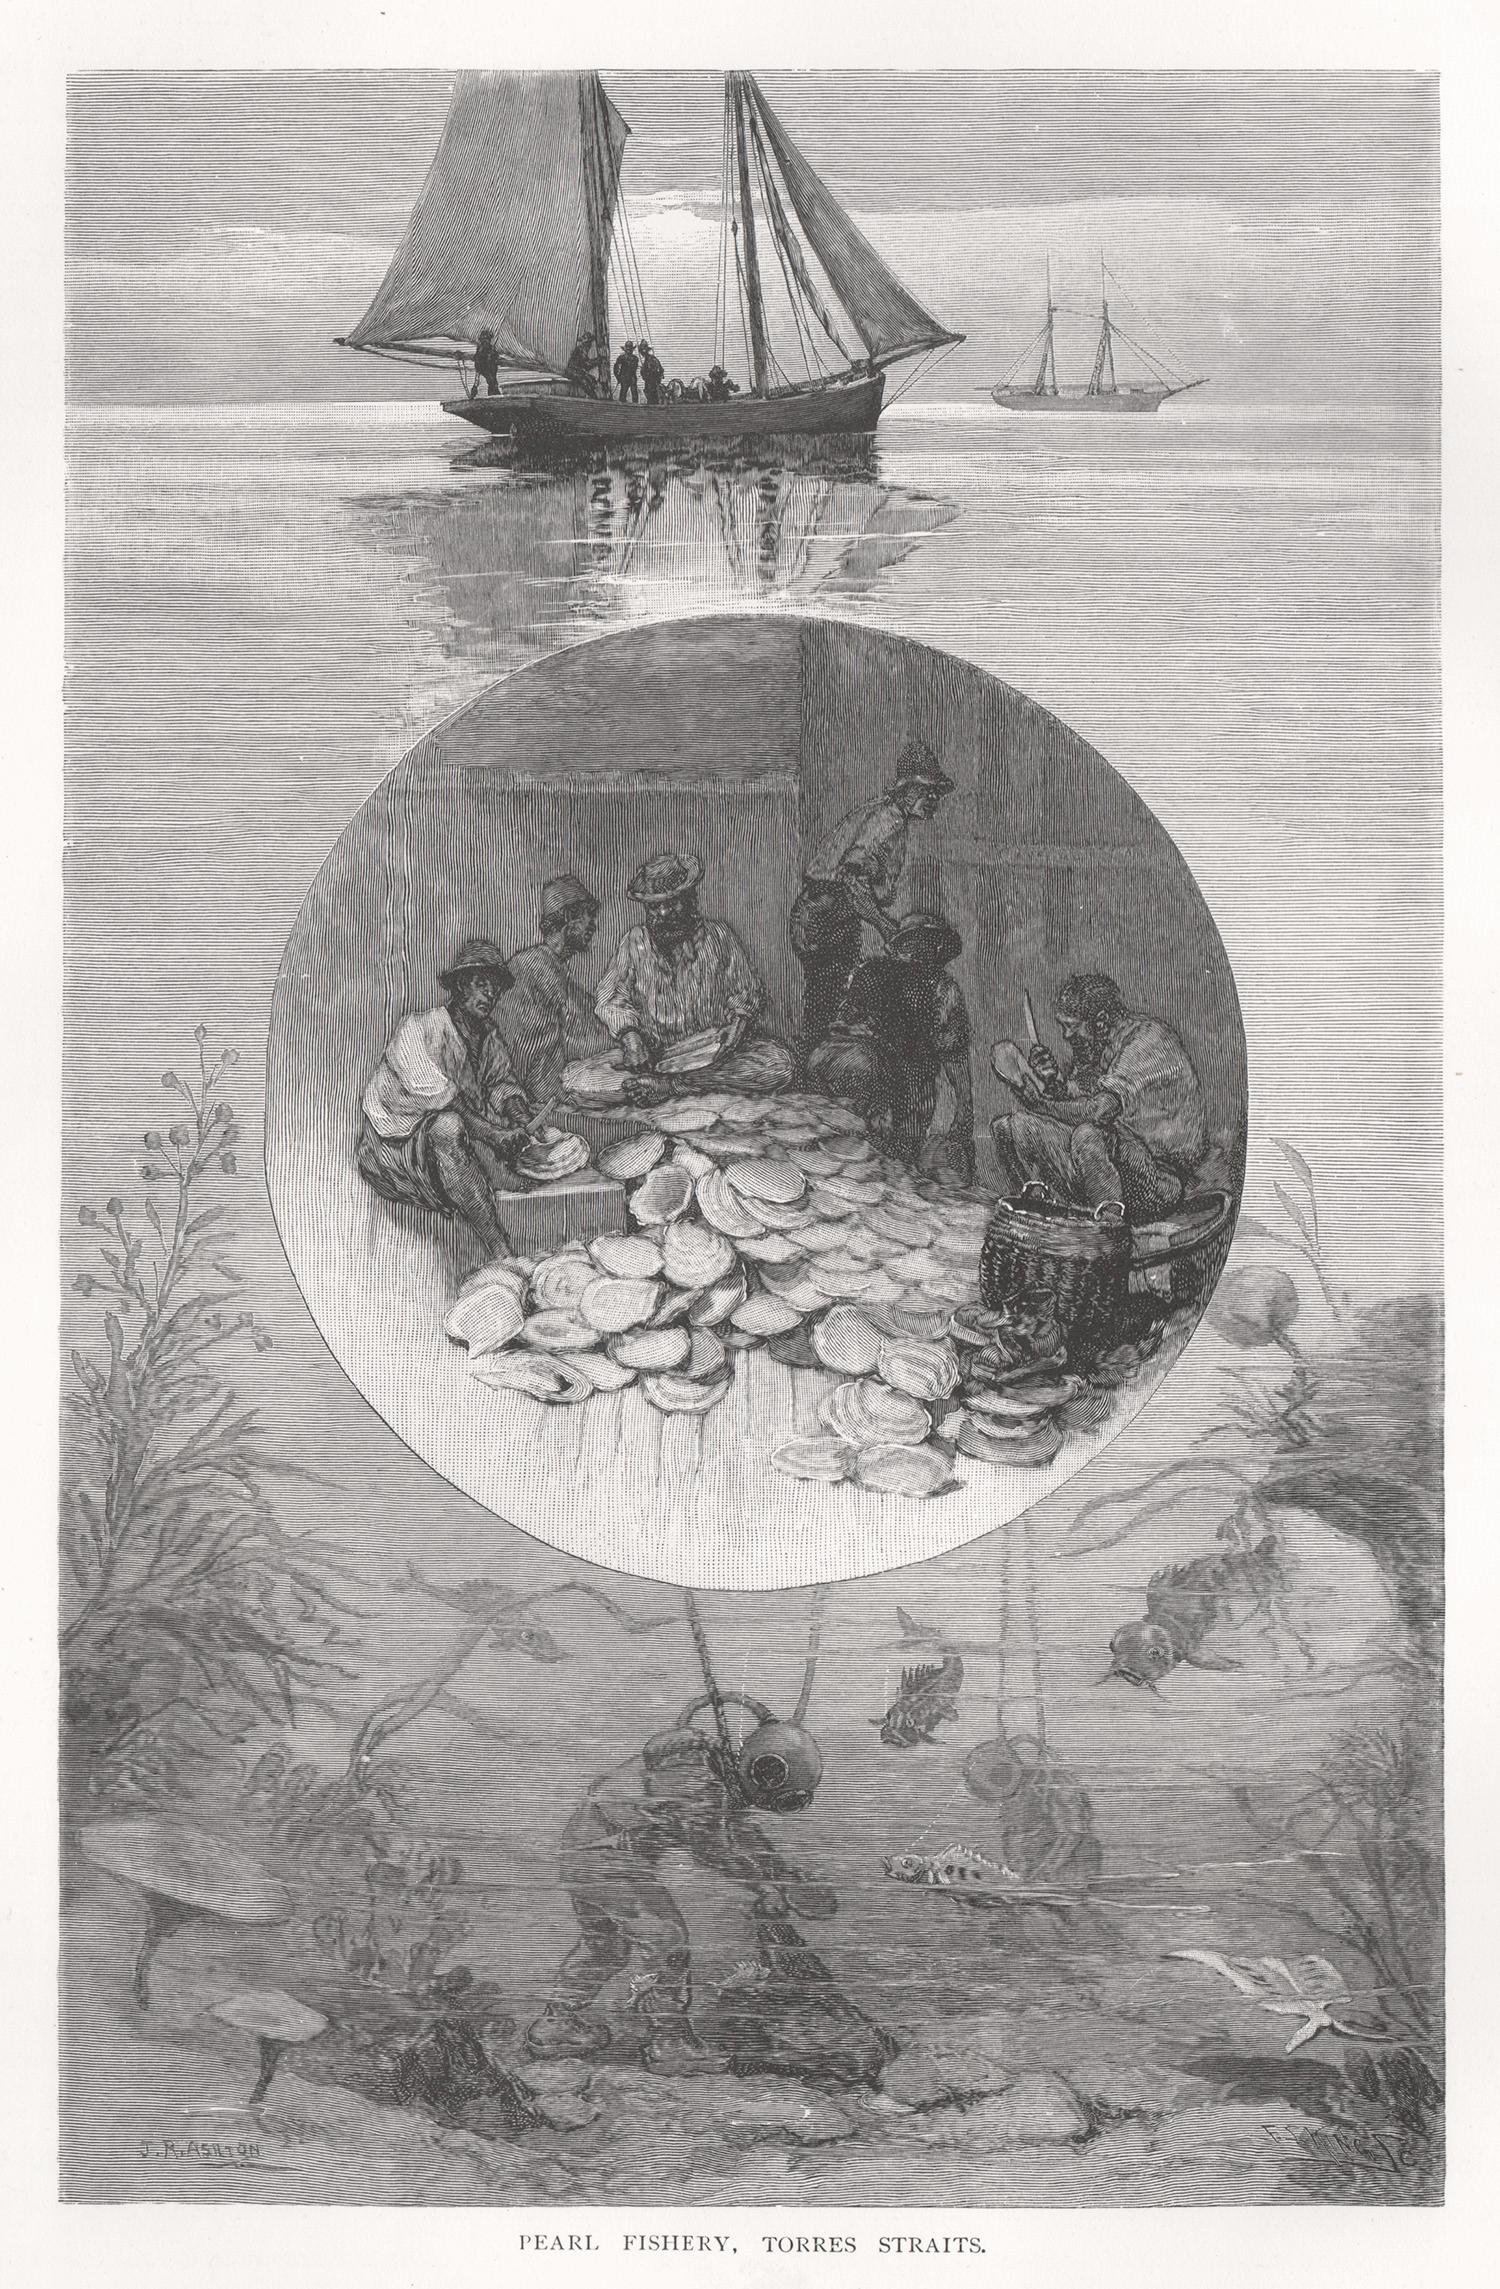 Pearl Fishery, Torres Straits, antique 1880s diving wood-engraving